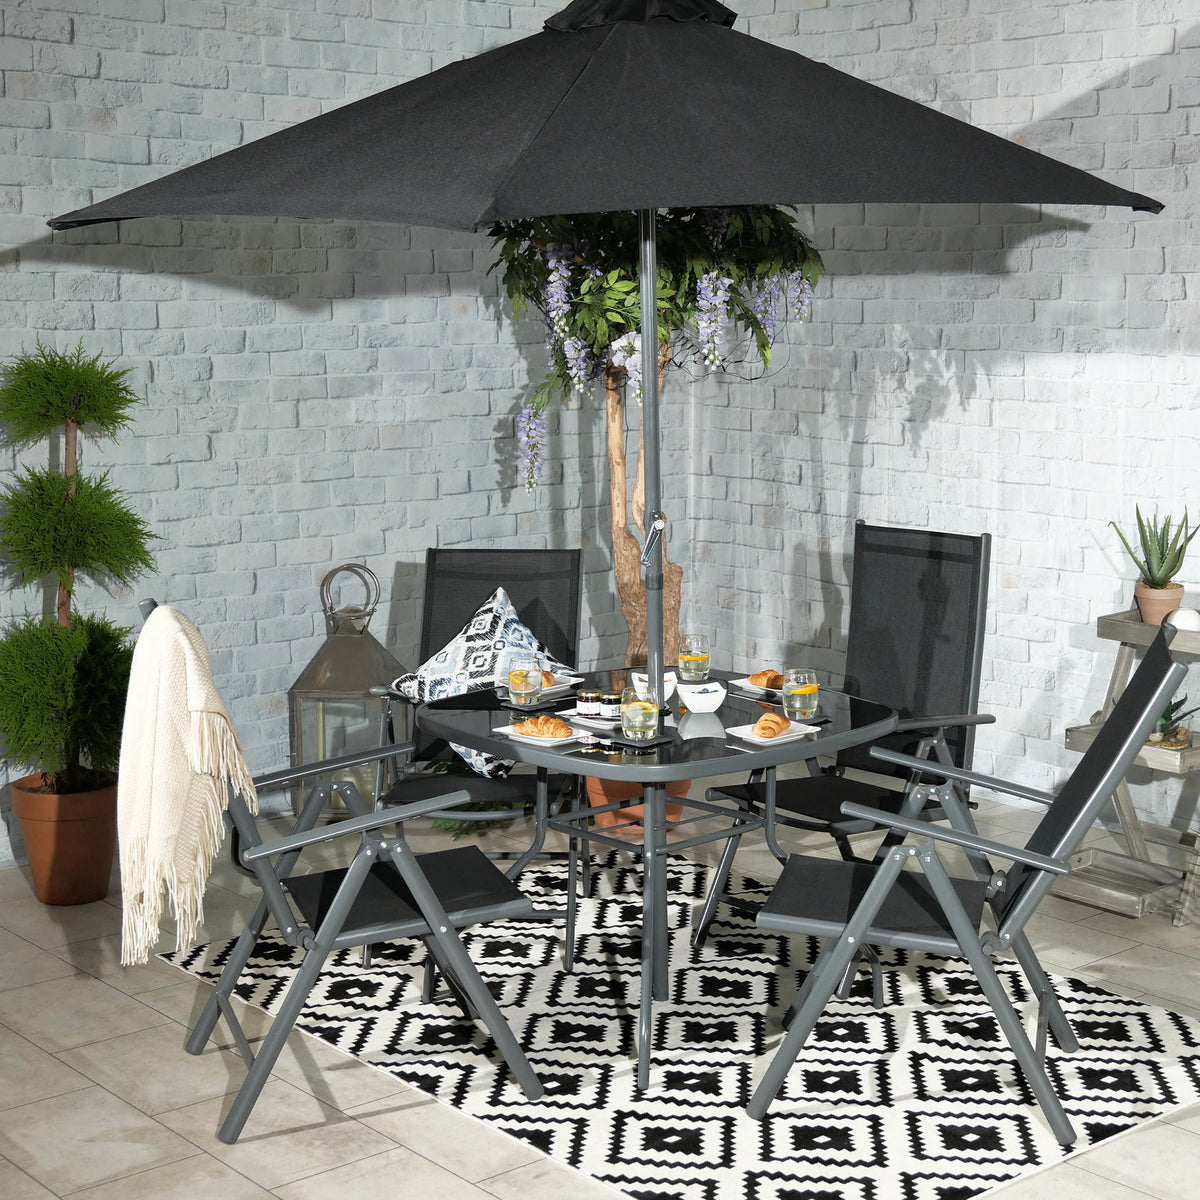 Rio Reclining 4 Seat Garden Dining Set with Parasol Lifestyle